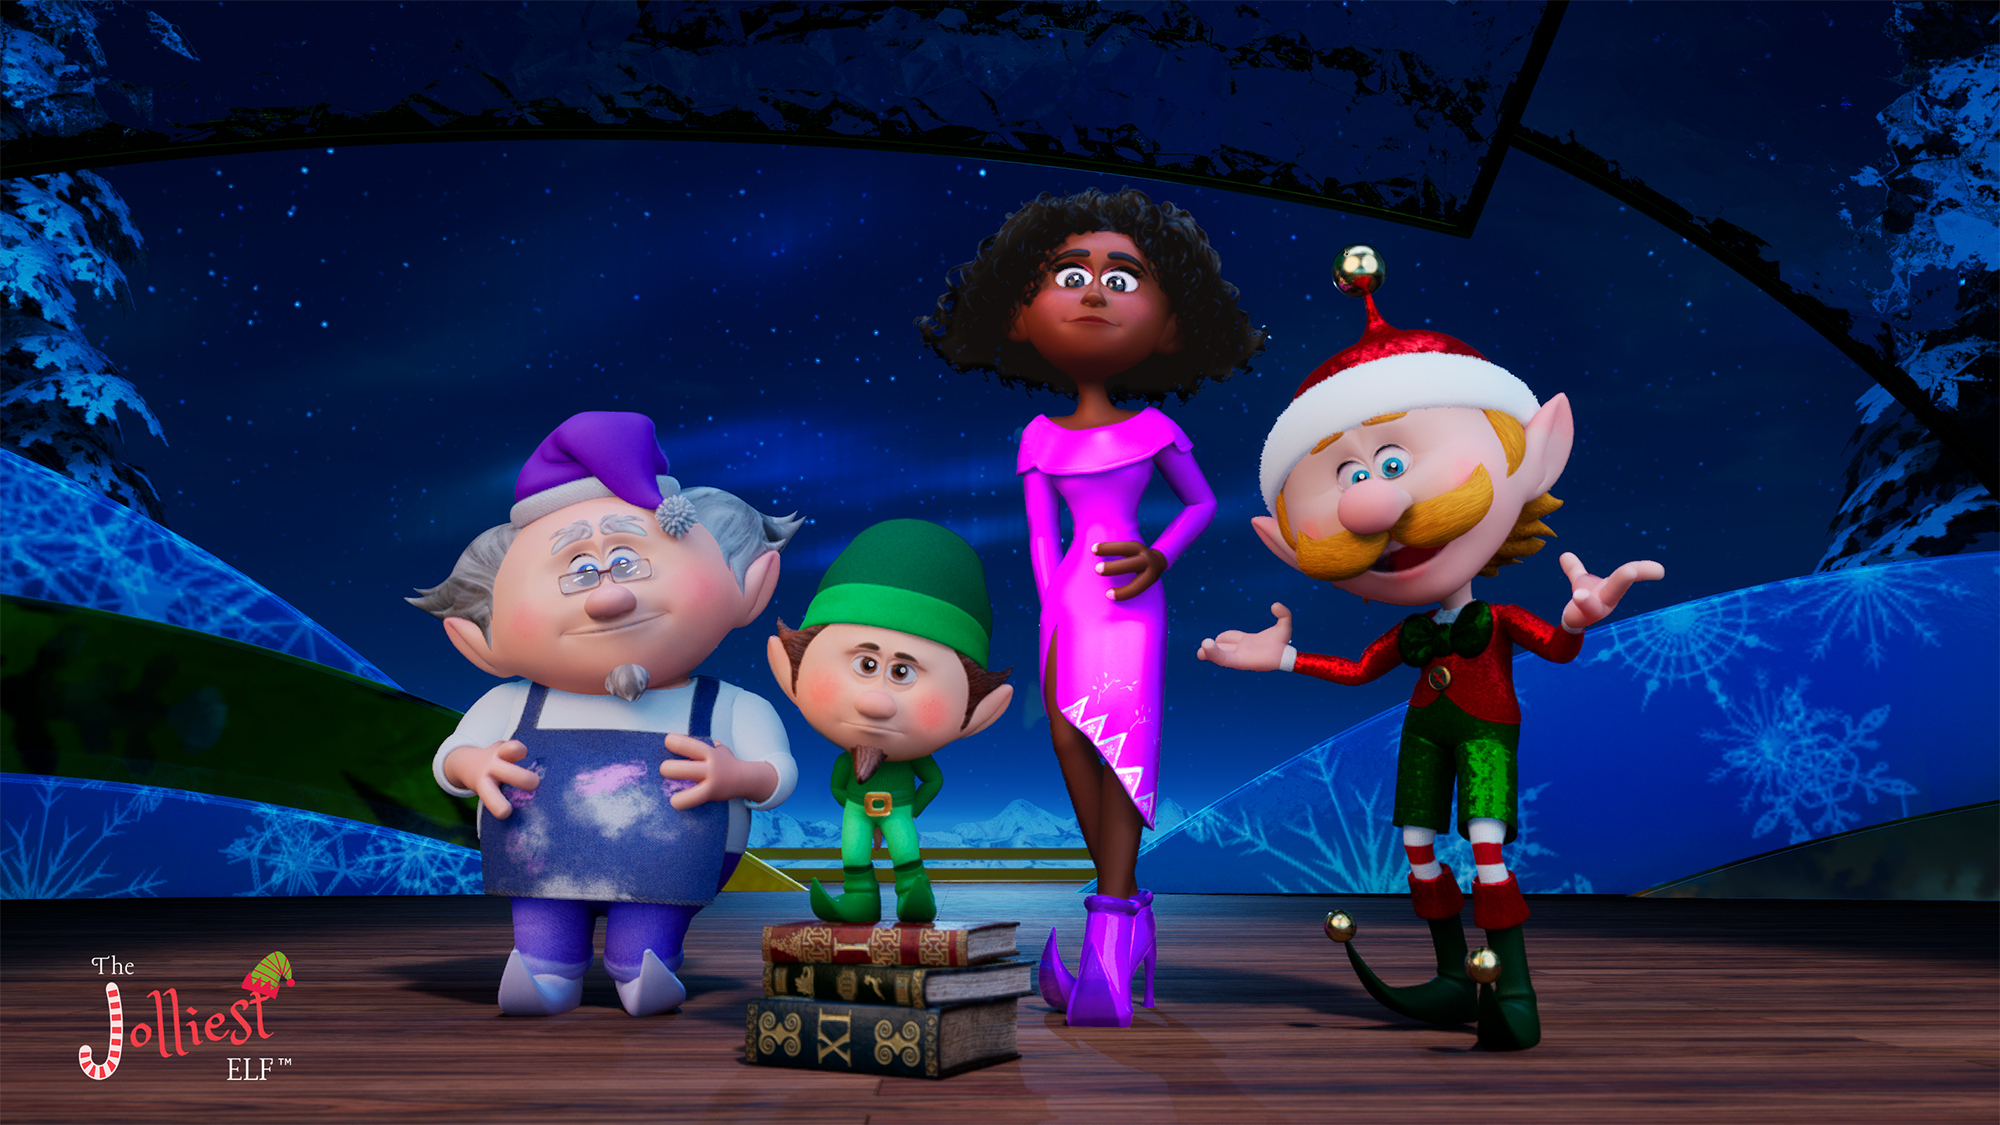 Real-Time Animated Series 'The Jolliest Elf' Premieres This Christmas |  Newswire